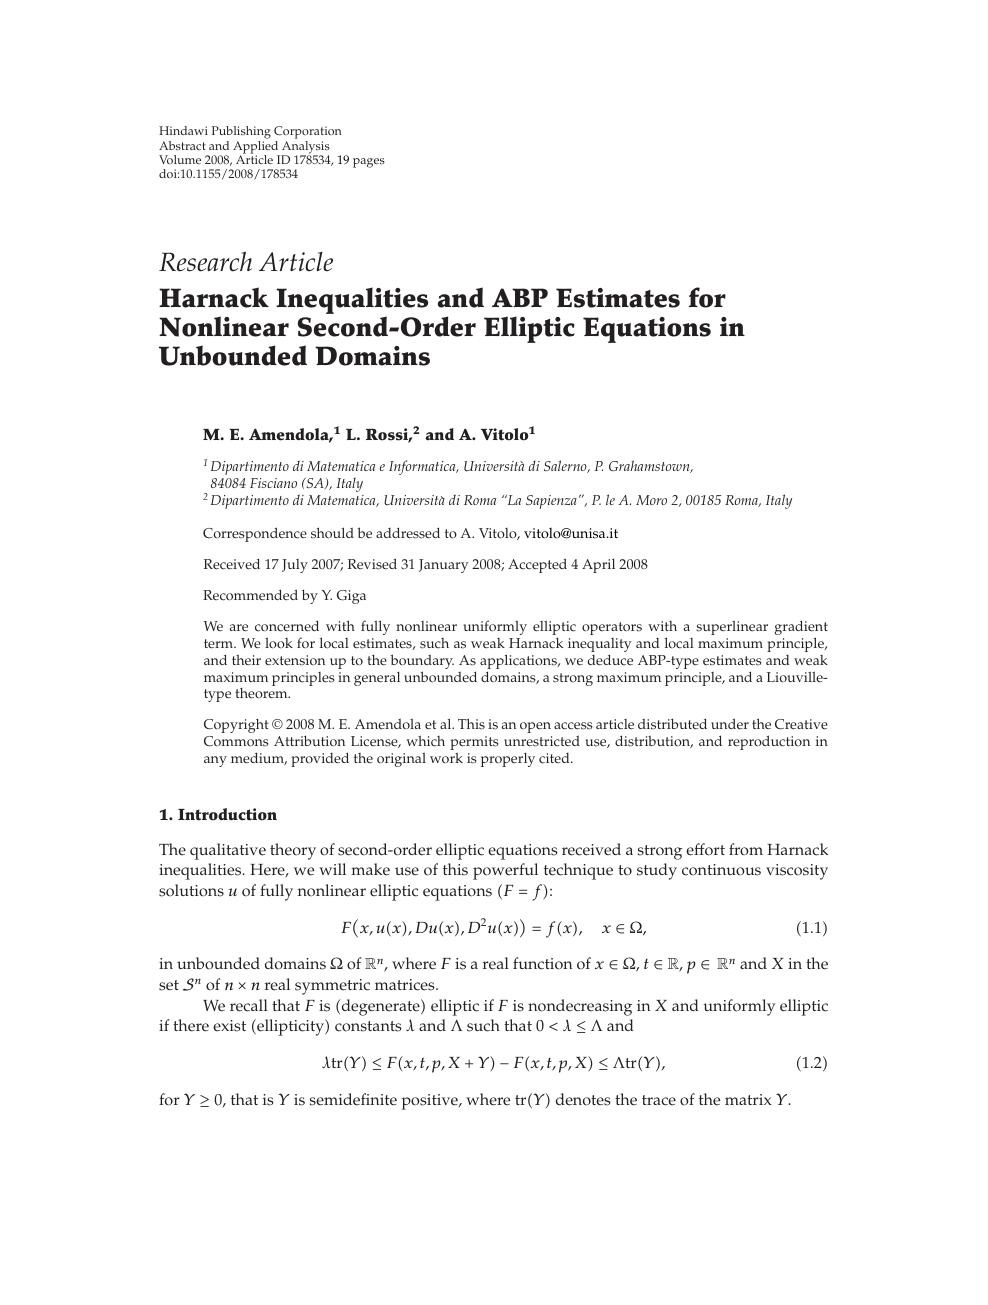 Harnack Inequalities And Abp Estimates For Nonlinear Second Order Elliptic Equations In Unbounded Domains Topic Of Research Paper In Mathematics Download Scholarly Article Pdf And Read For Free On Cyberleninka Open Science